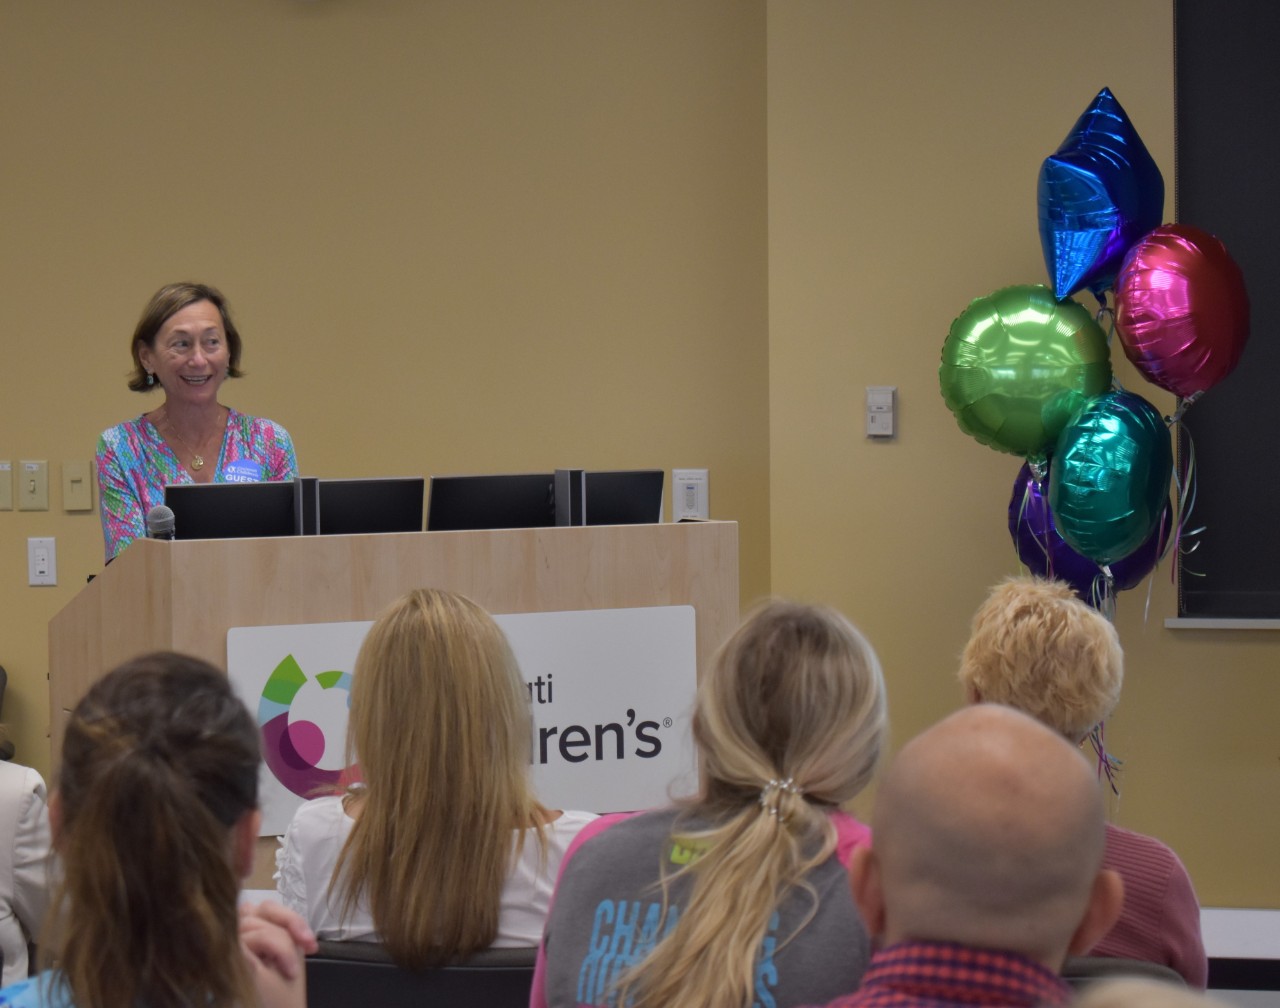 UC College of Nursing Dean Greer Glazer at the opening of the dedicated education unit at Children's Hospital Aug. 27, 2019